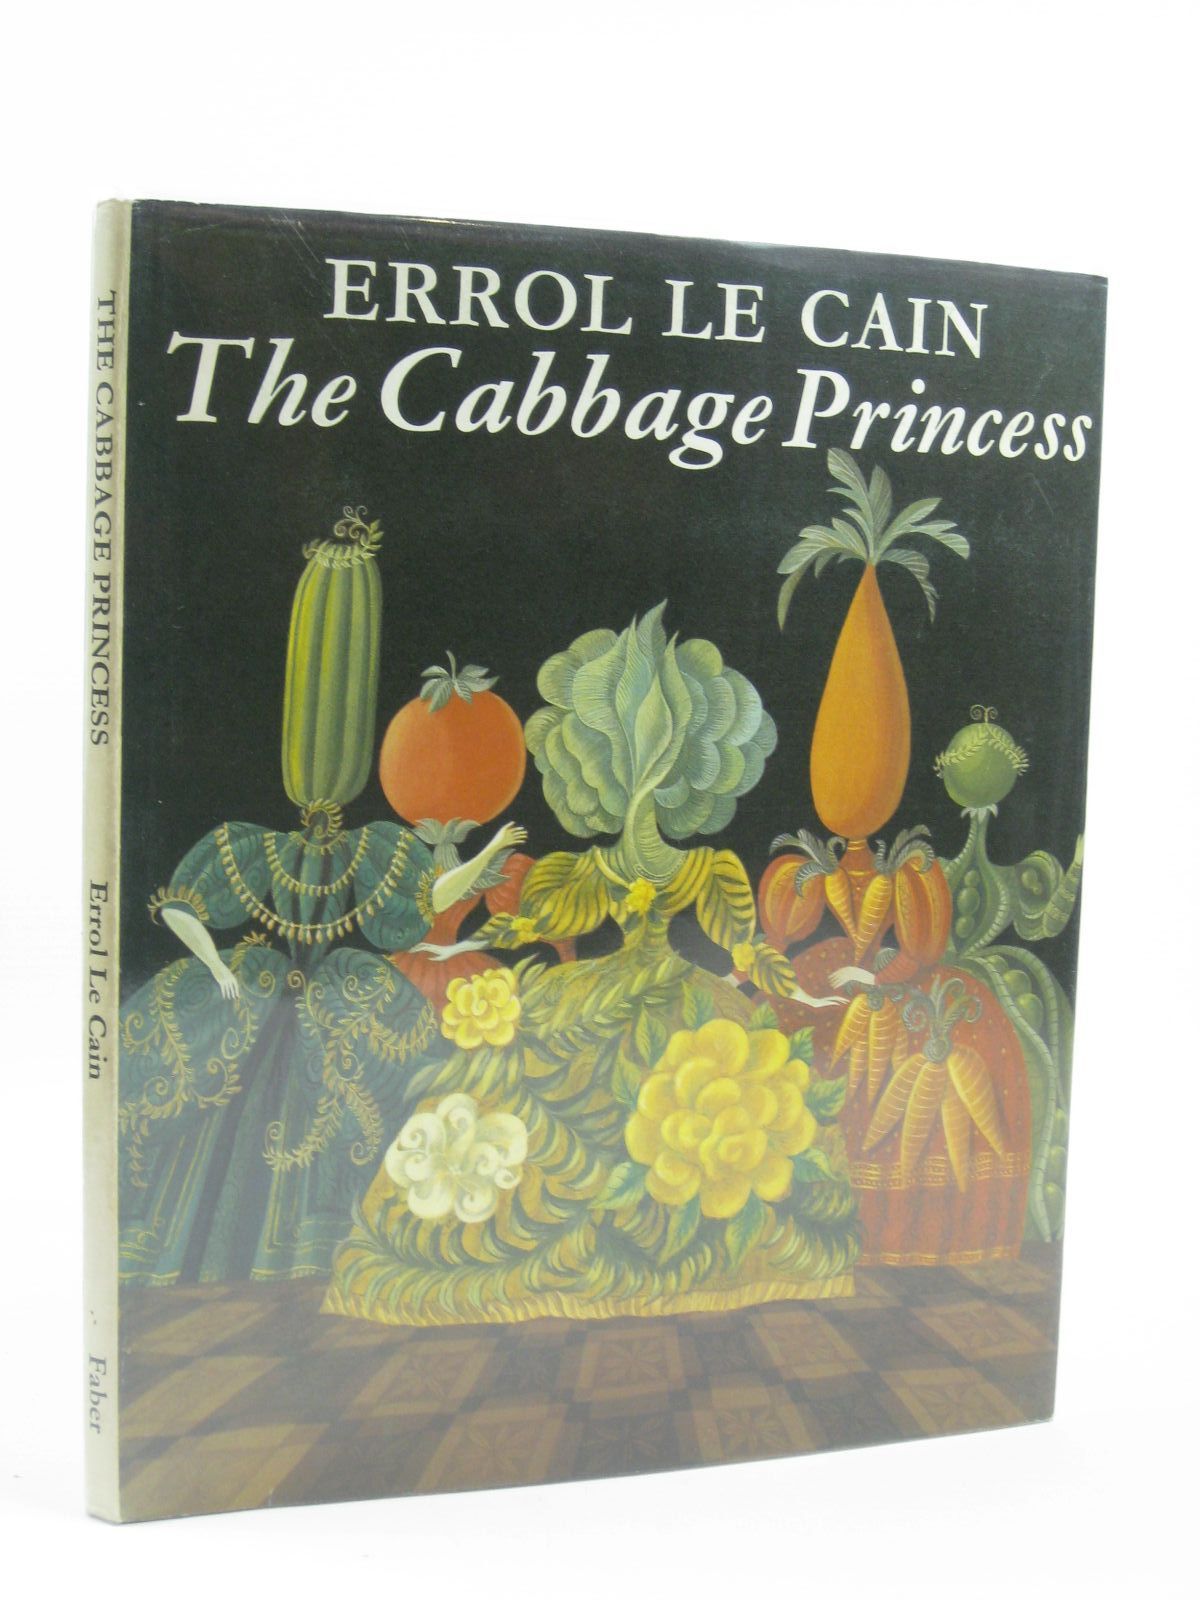 Cover of THE CABBAGE PRINCESS by Errol Le Cain